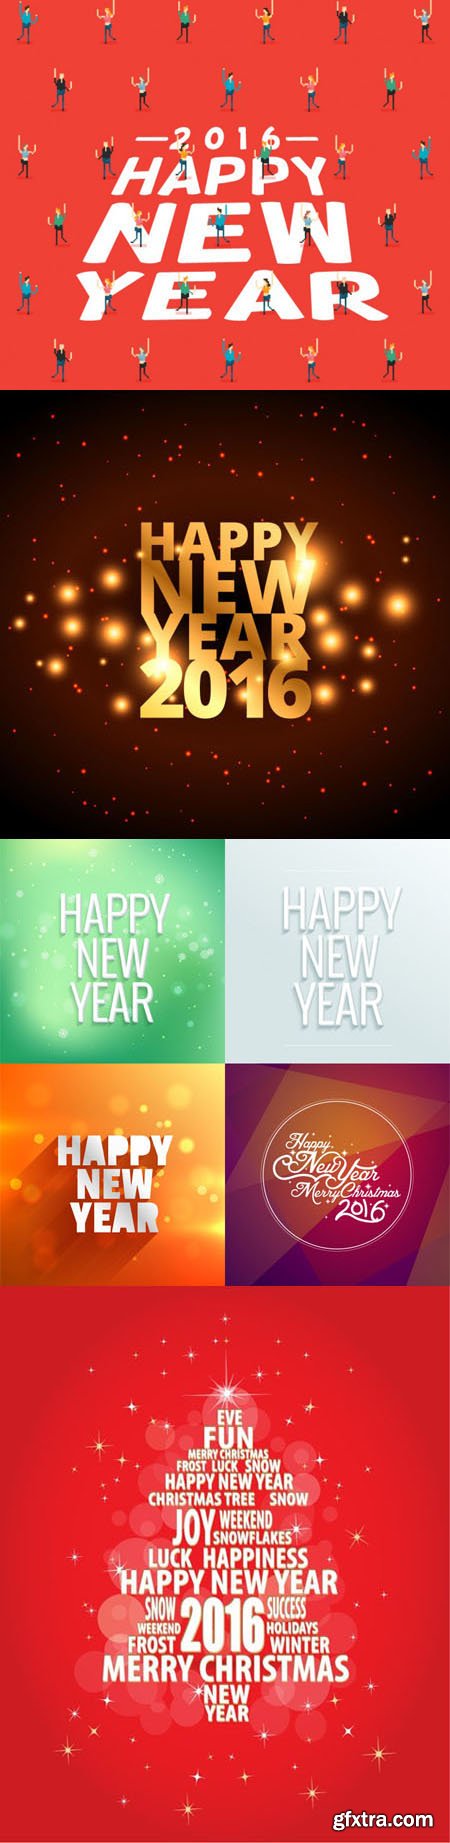 Happy New Year 2016 Greeting Background Vector [Vol.2]